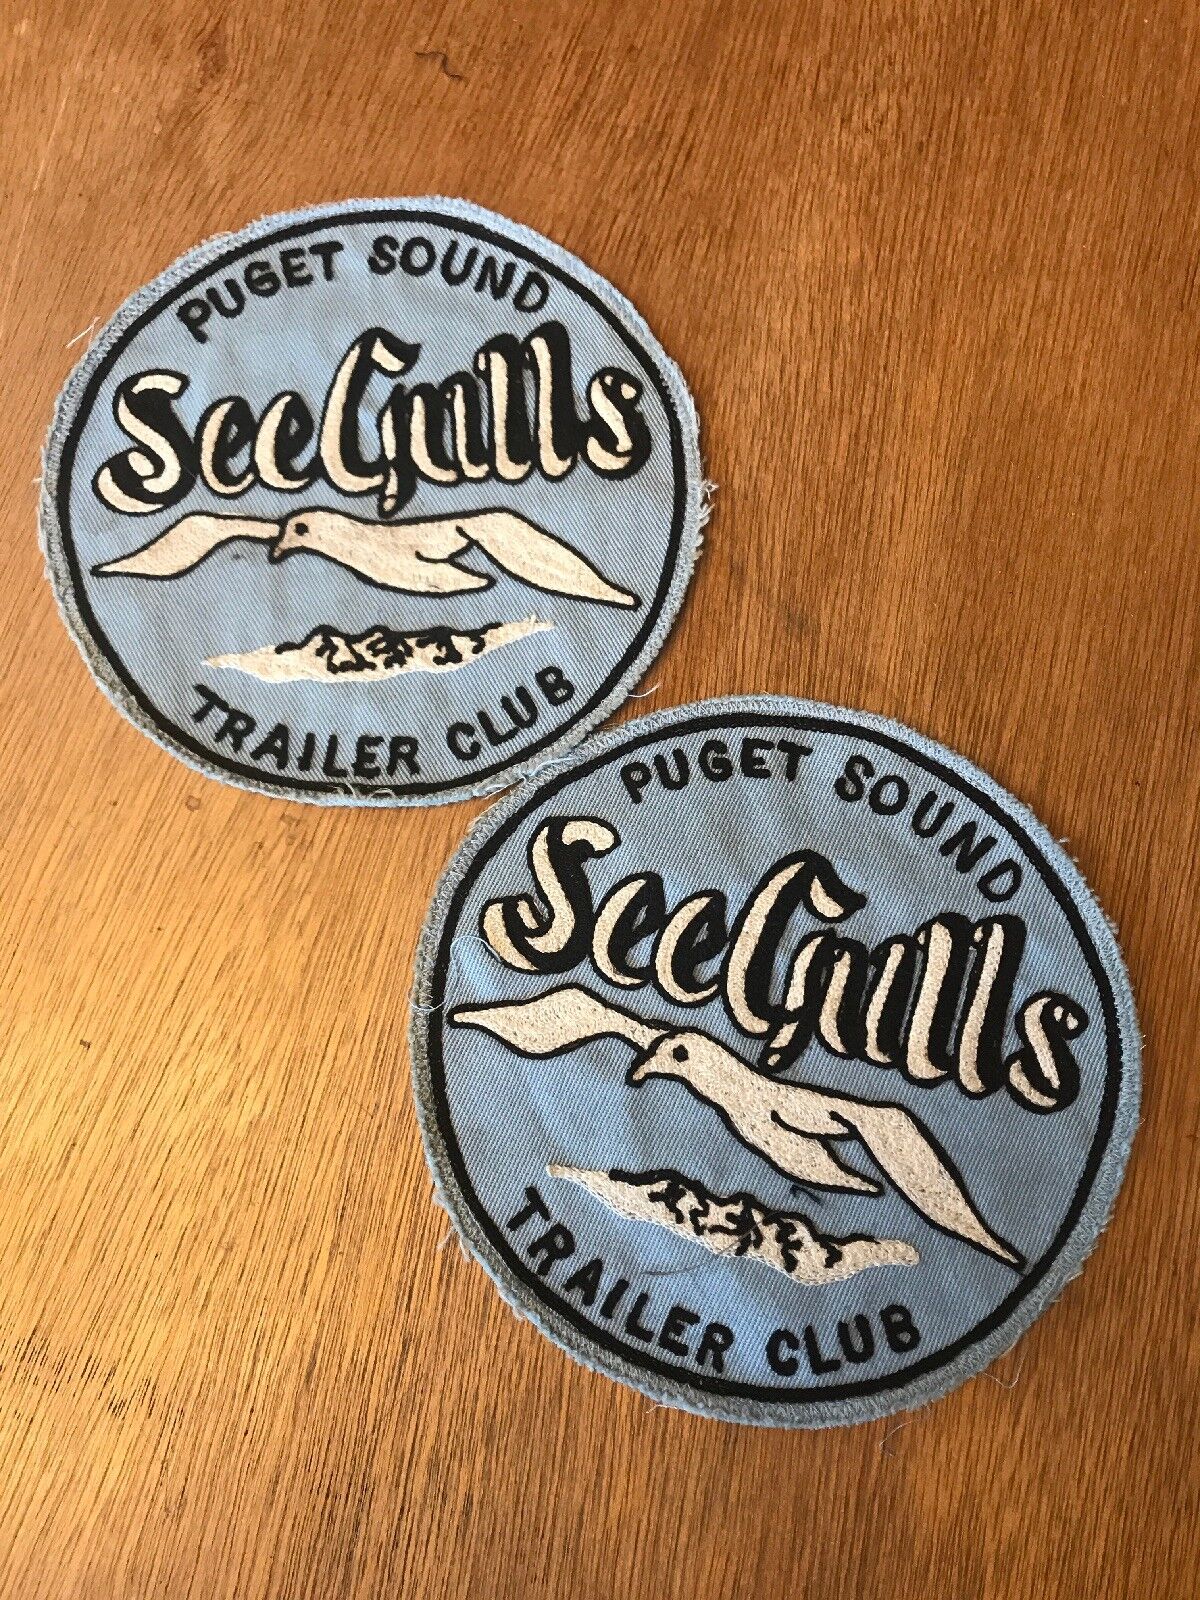 Lot of 2 Puget Sound SeeGulls Travel Trailer Club Embroidered Patch Vintage RV